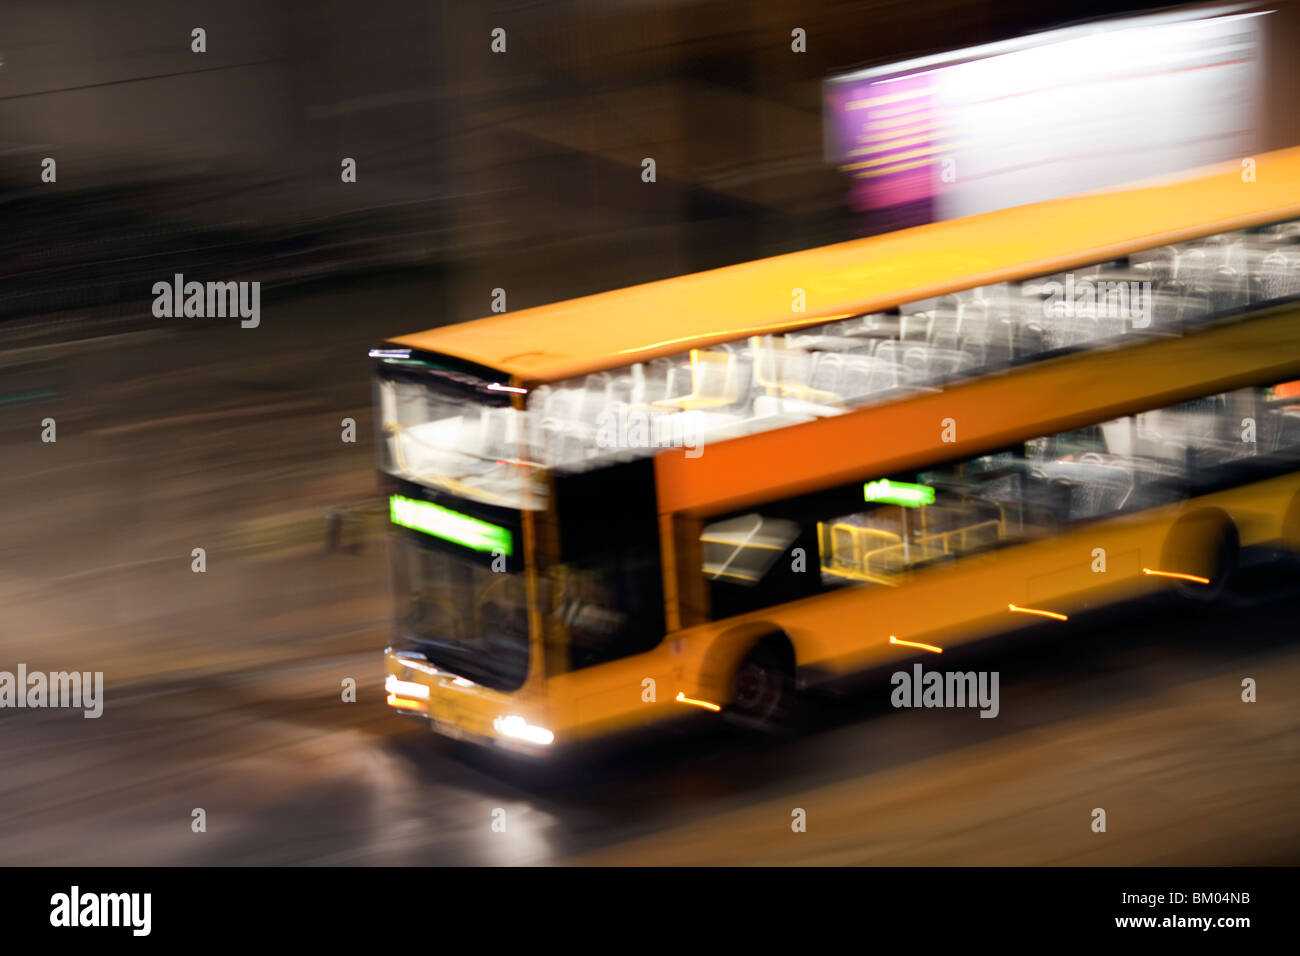 Panning shot of a bus by night, Berlin, Germany Stock Photo